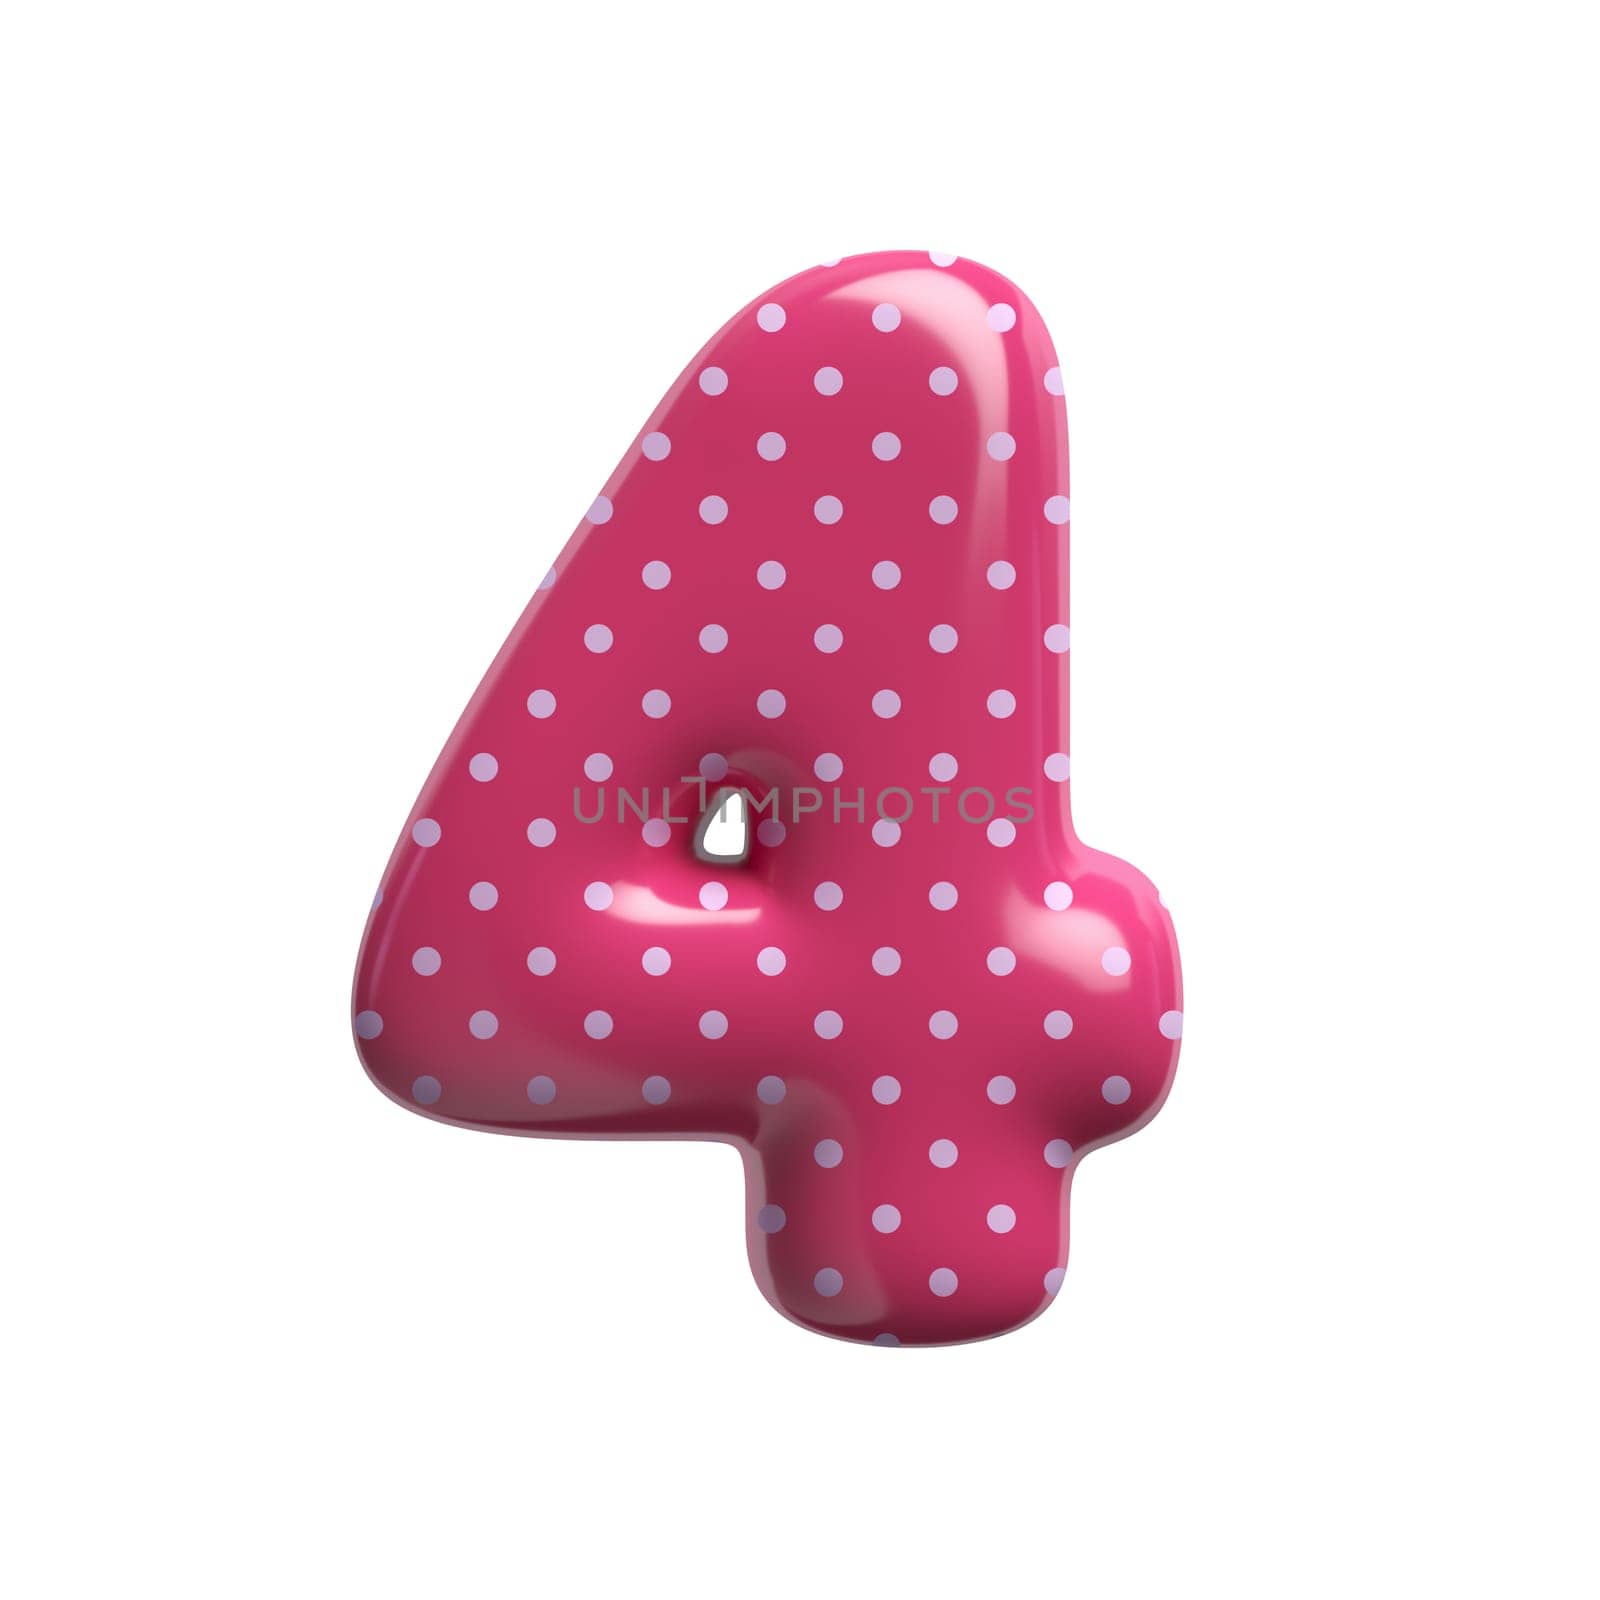 Polka dot number 4 - 3d pink retro digit - Suitable for Fashion, retro design or decoration related subjects by chrisroll